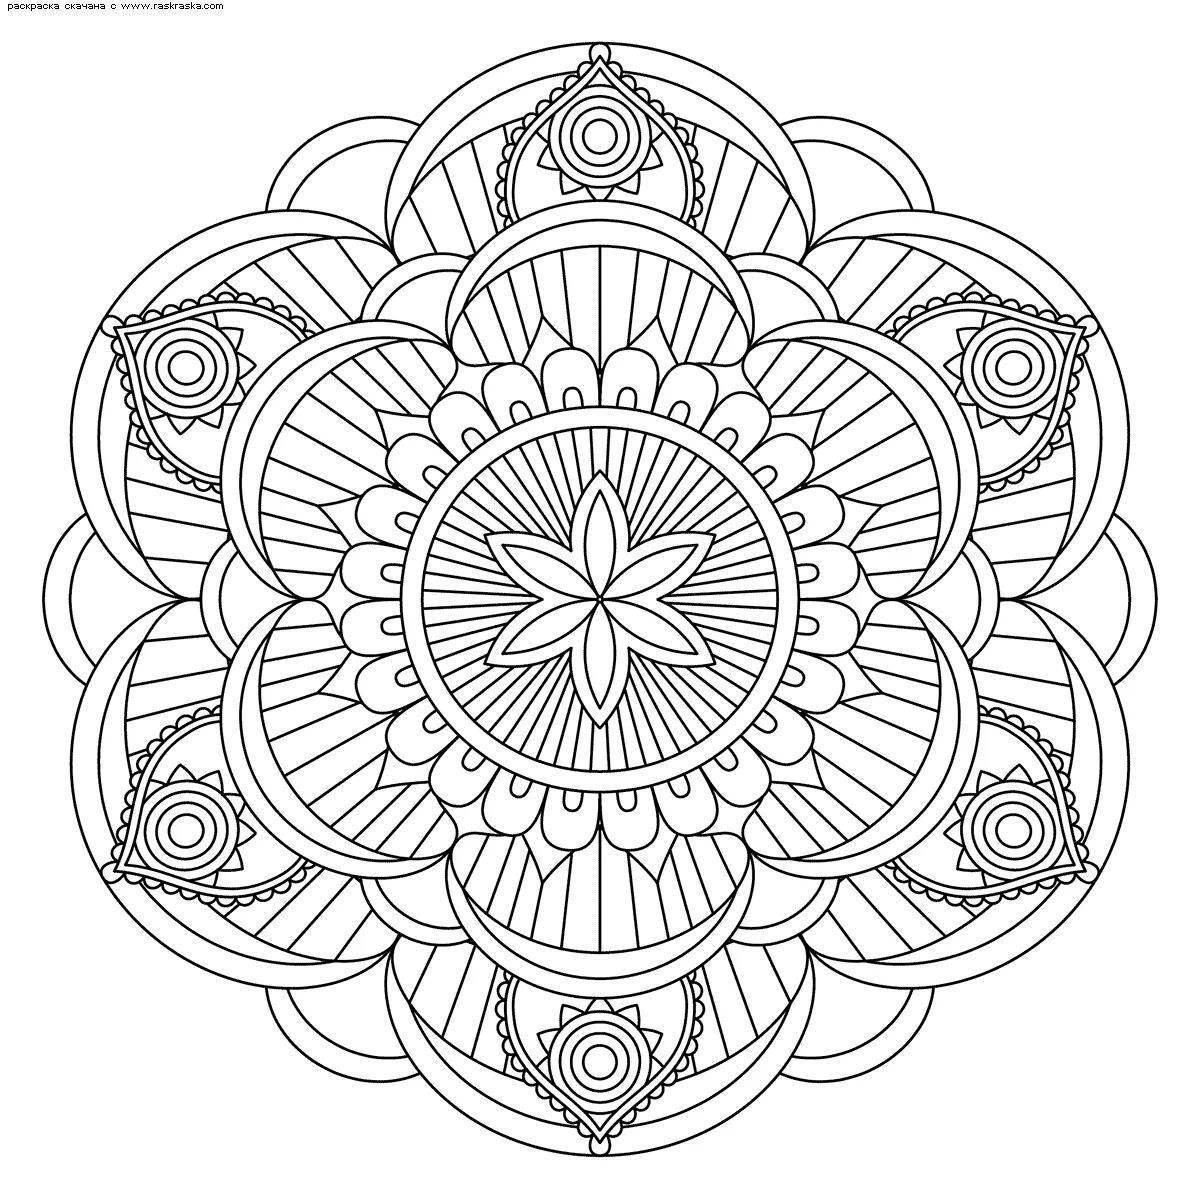 Inspirational anti-stress mandala coloring pages for kids